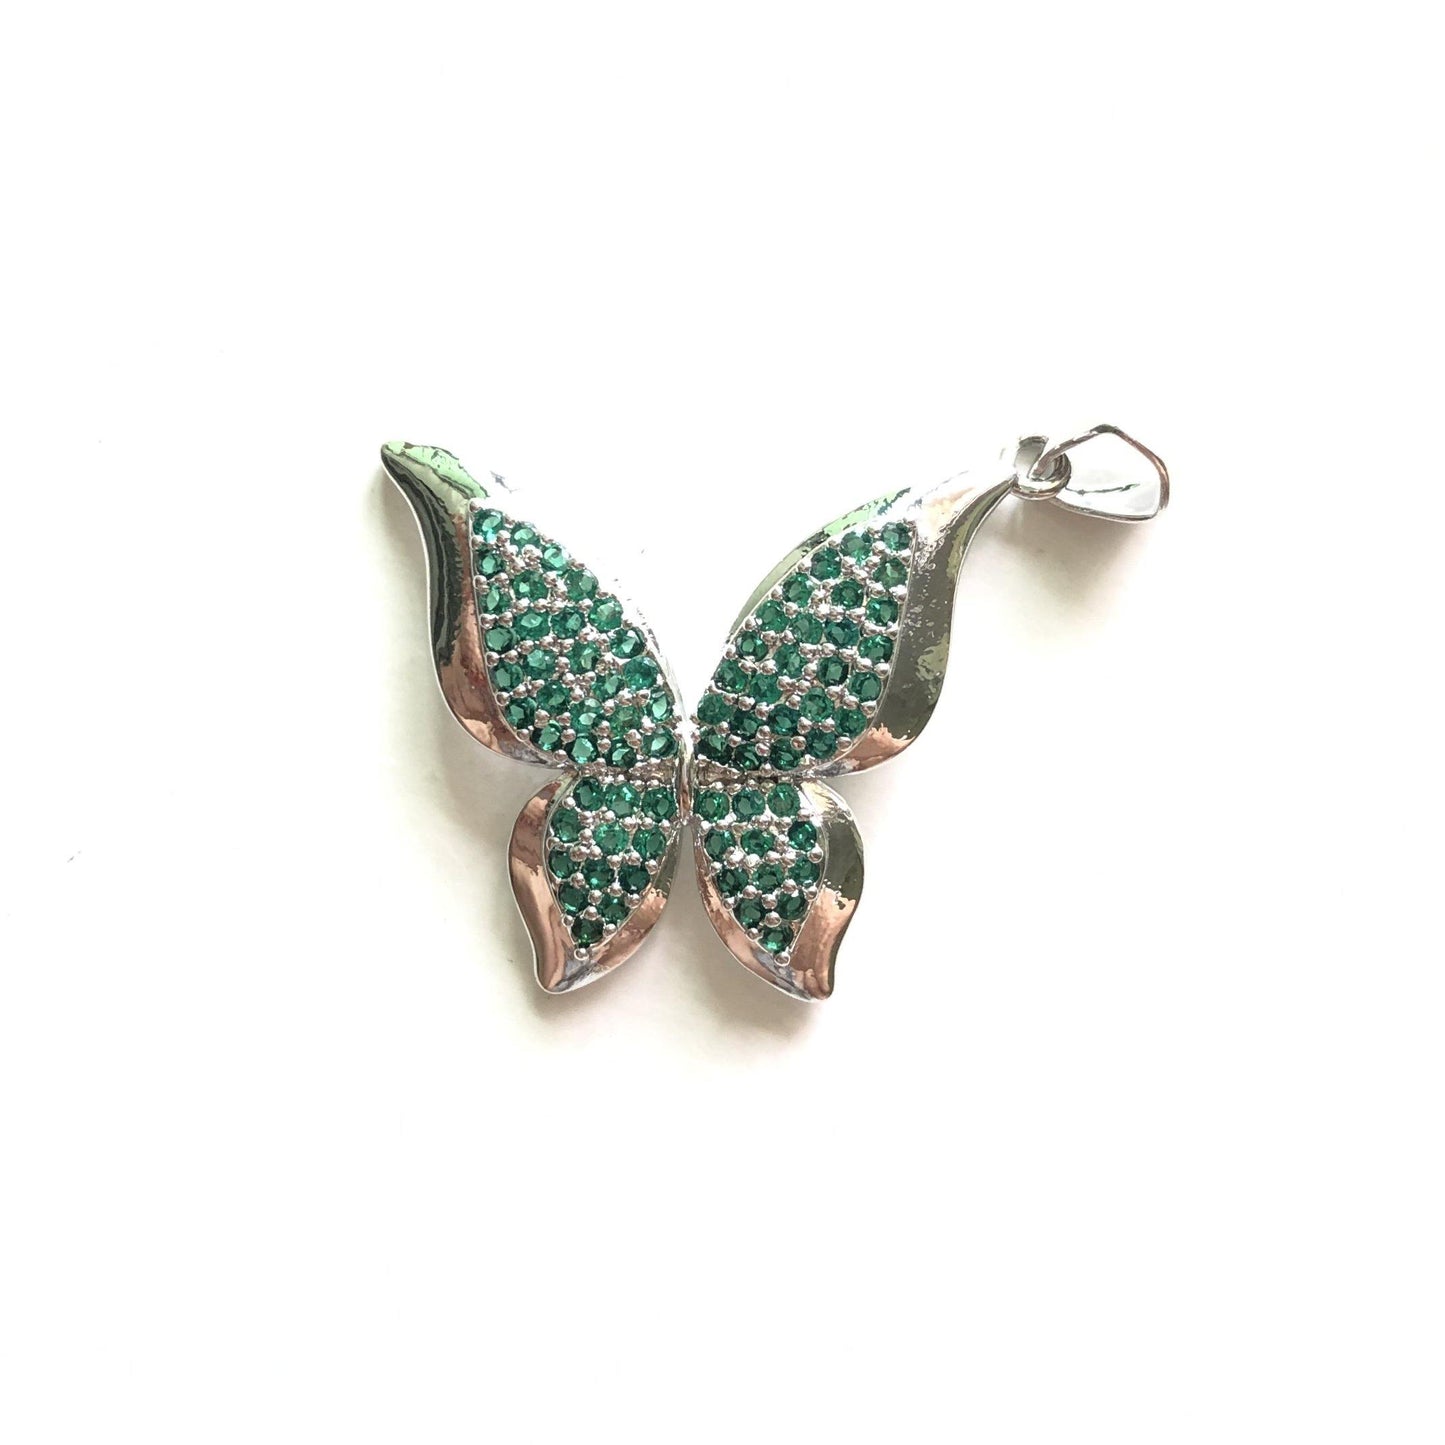 5pcs/lot 27*23mm Multicolor CZ Paved Butterfly Charms Green on Silver CZ Paved Charms Butterflies Colorful Zirconia Charms Beads Beyond